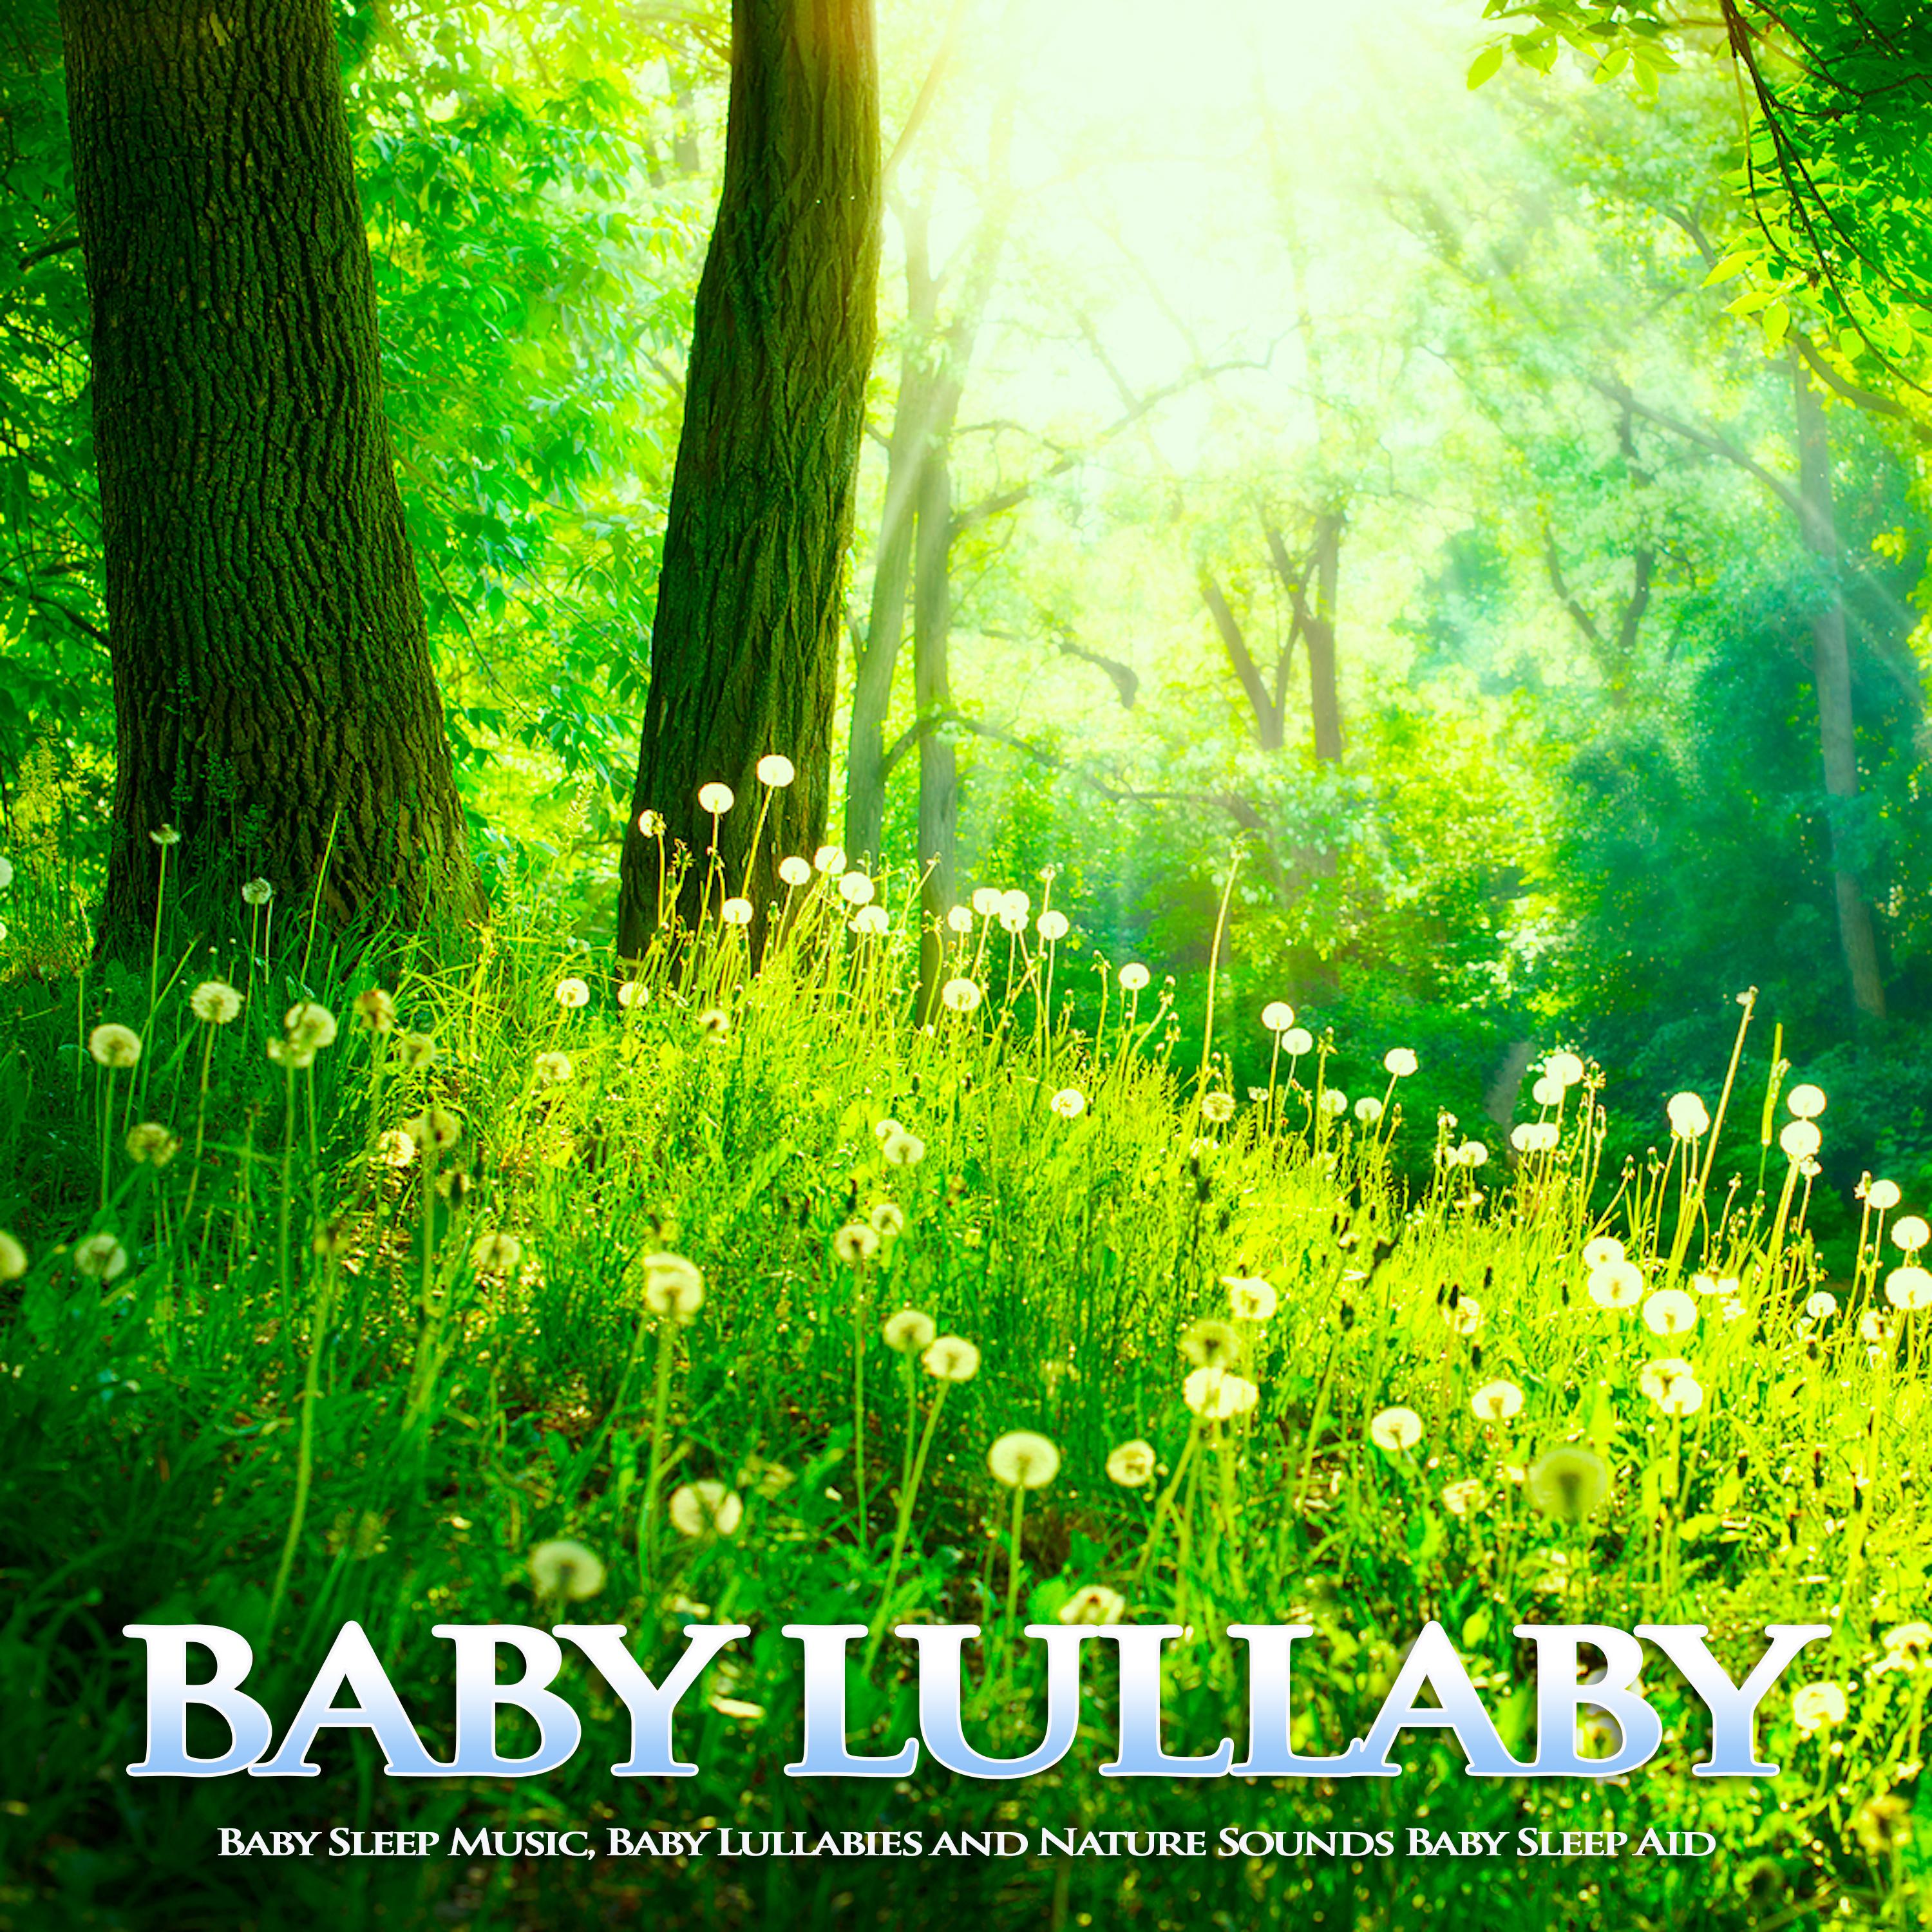 Baby Lullabies and Sounds of Nature